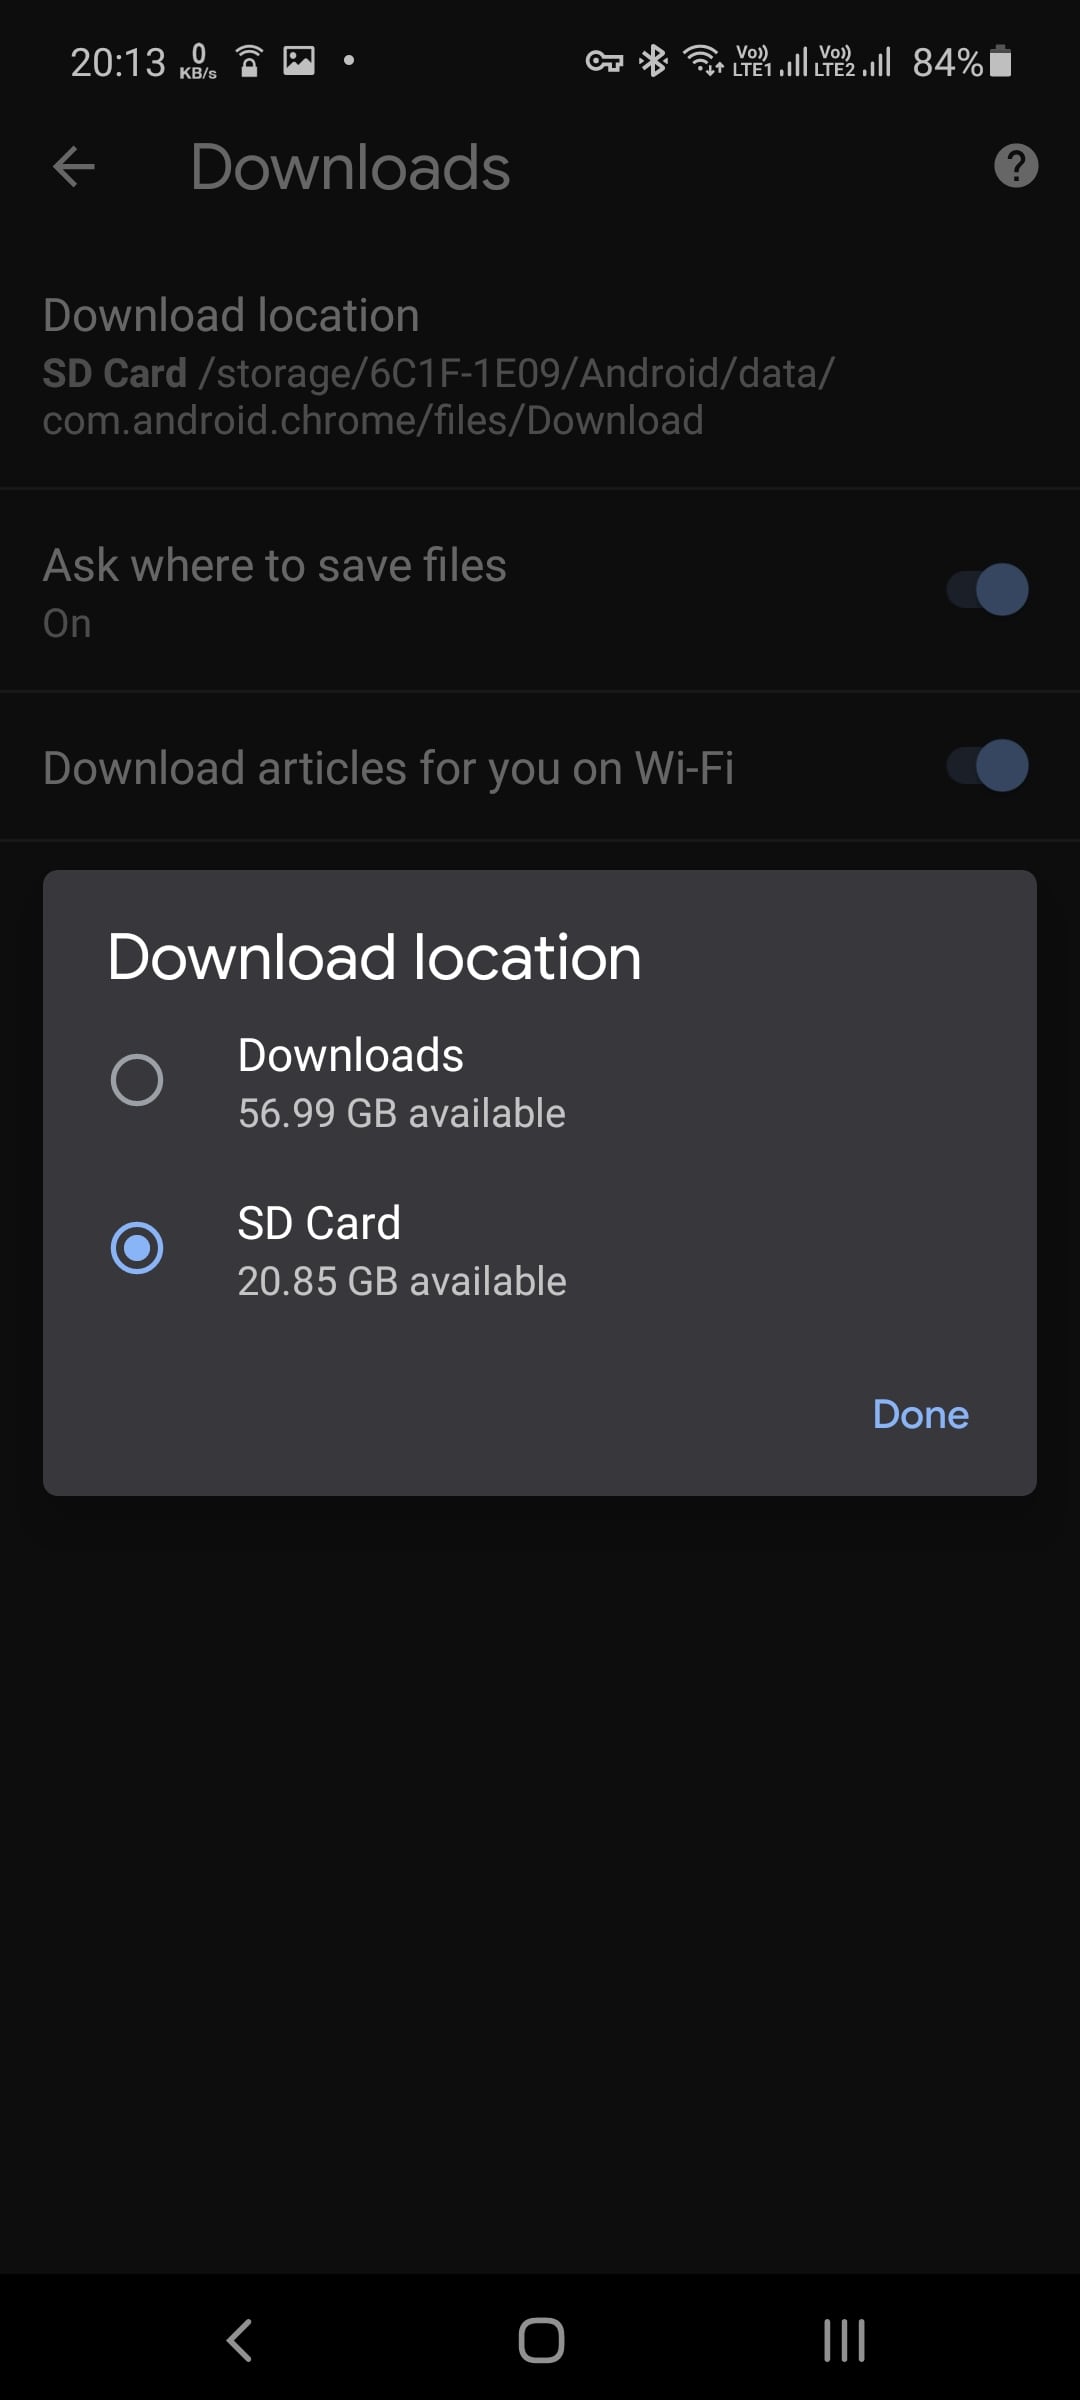 SD card selected as download location